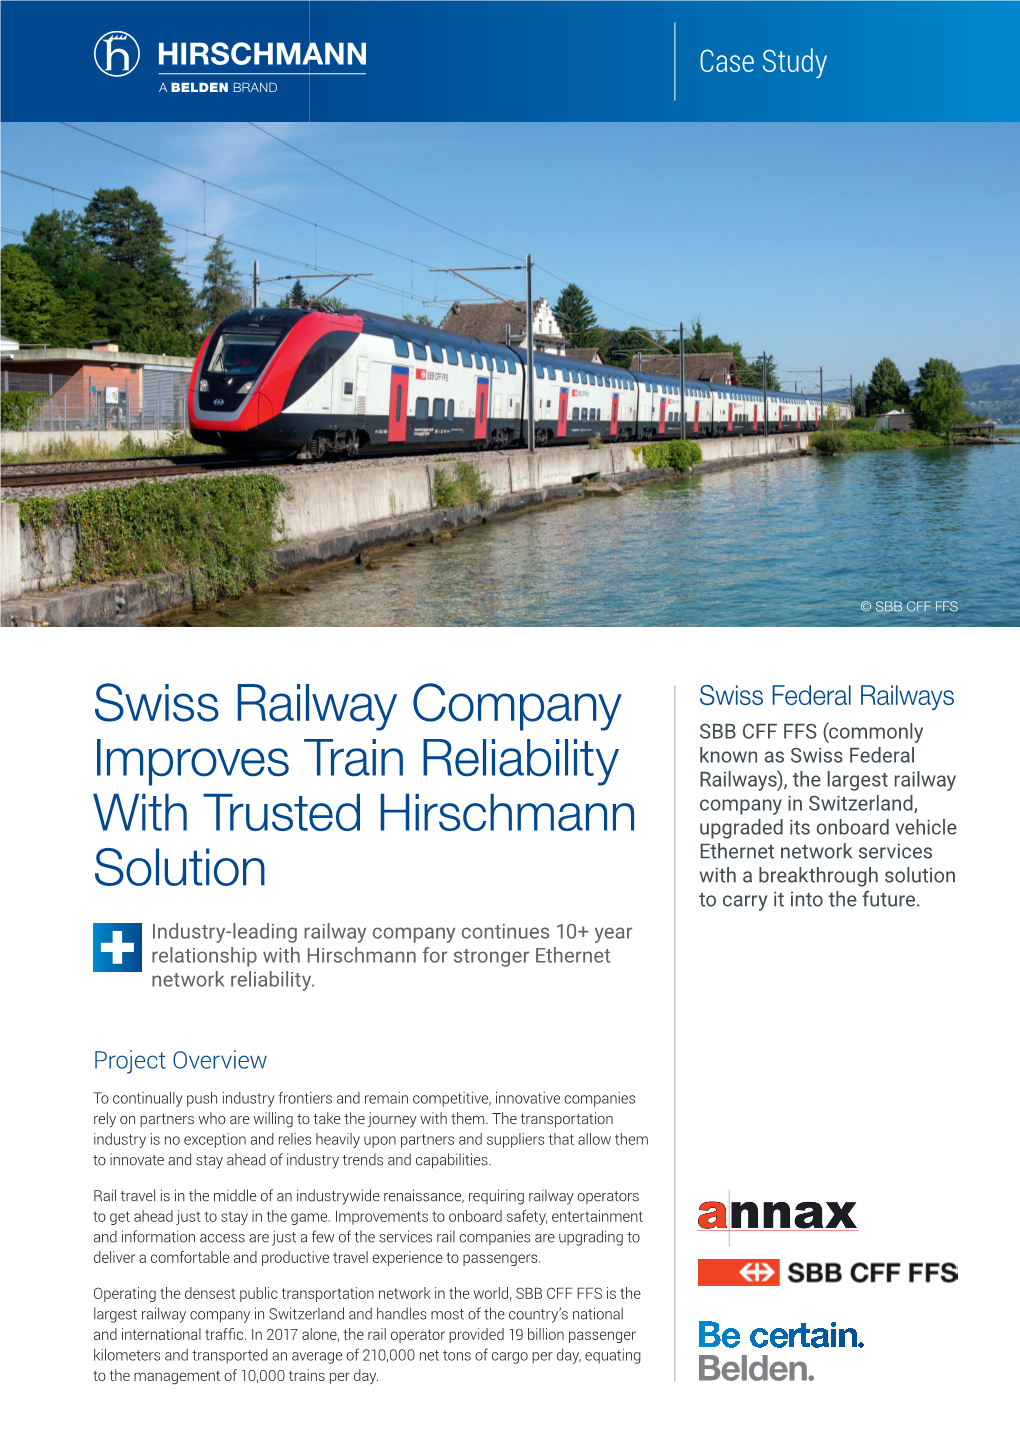 Swiss Railway Company Improves Train Reliability with Trusted